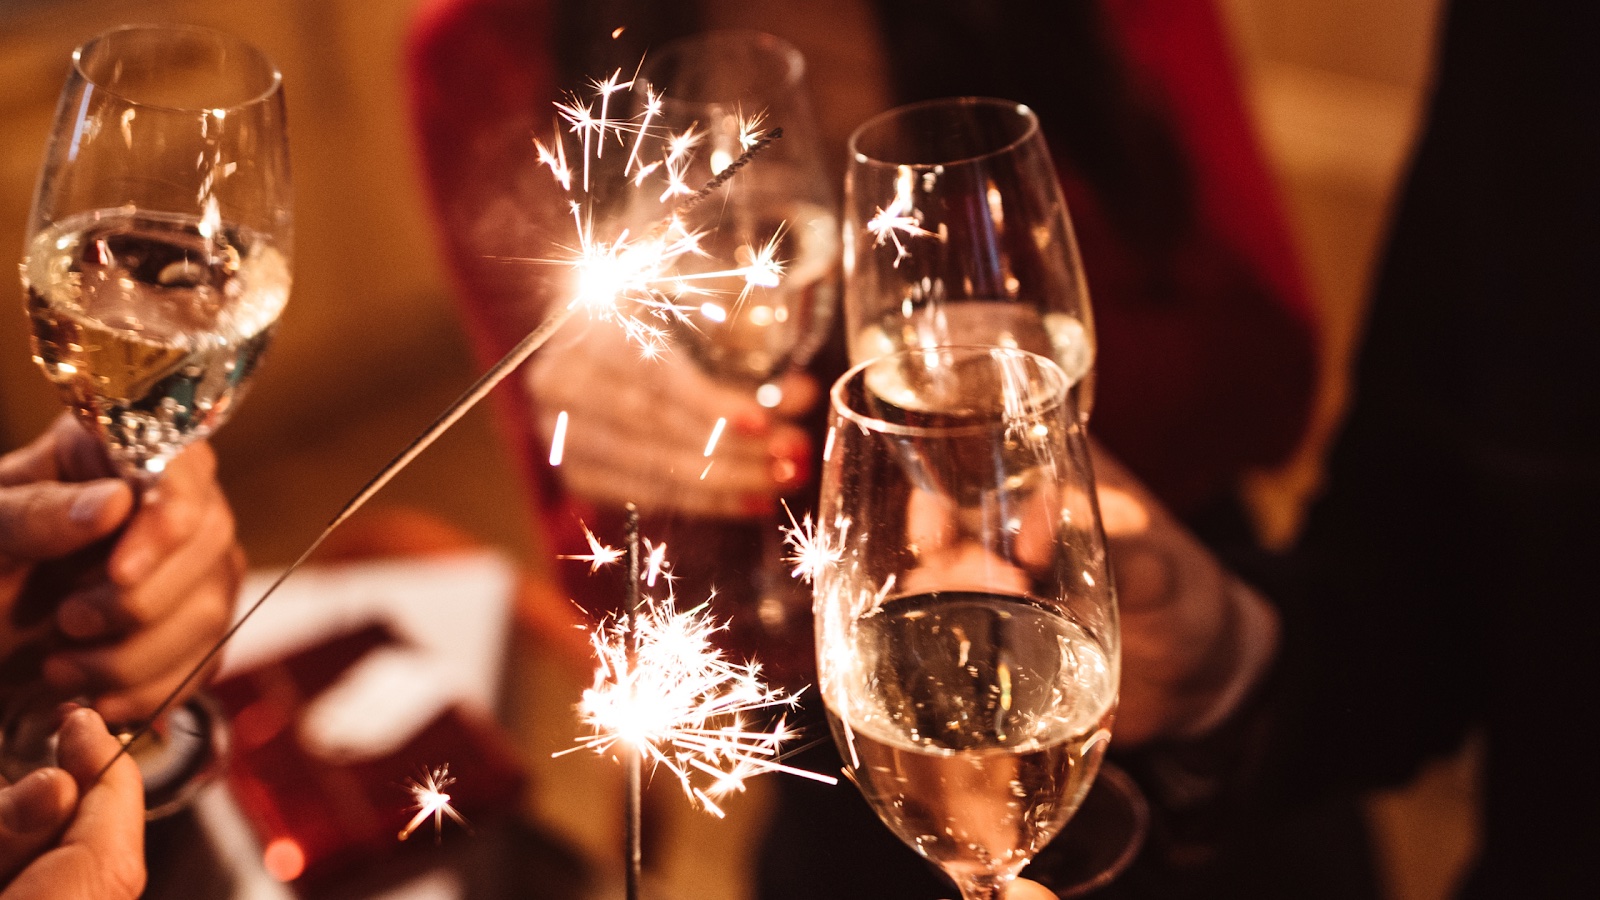 A group of people hold glasses of wine and sparklers during a holiday party.